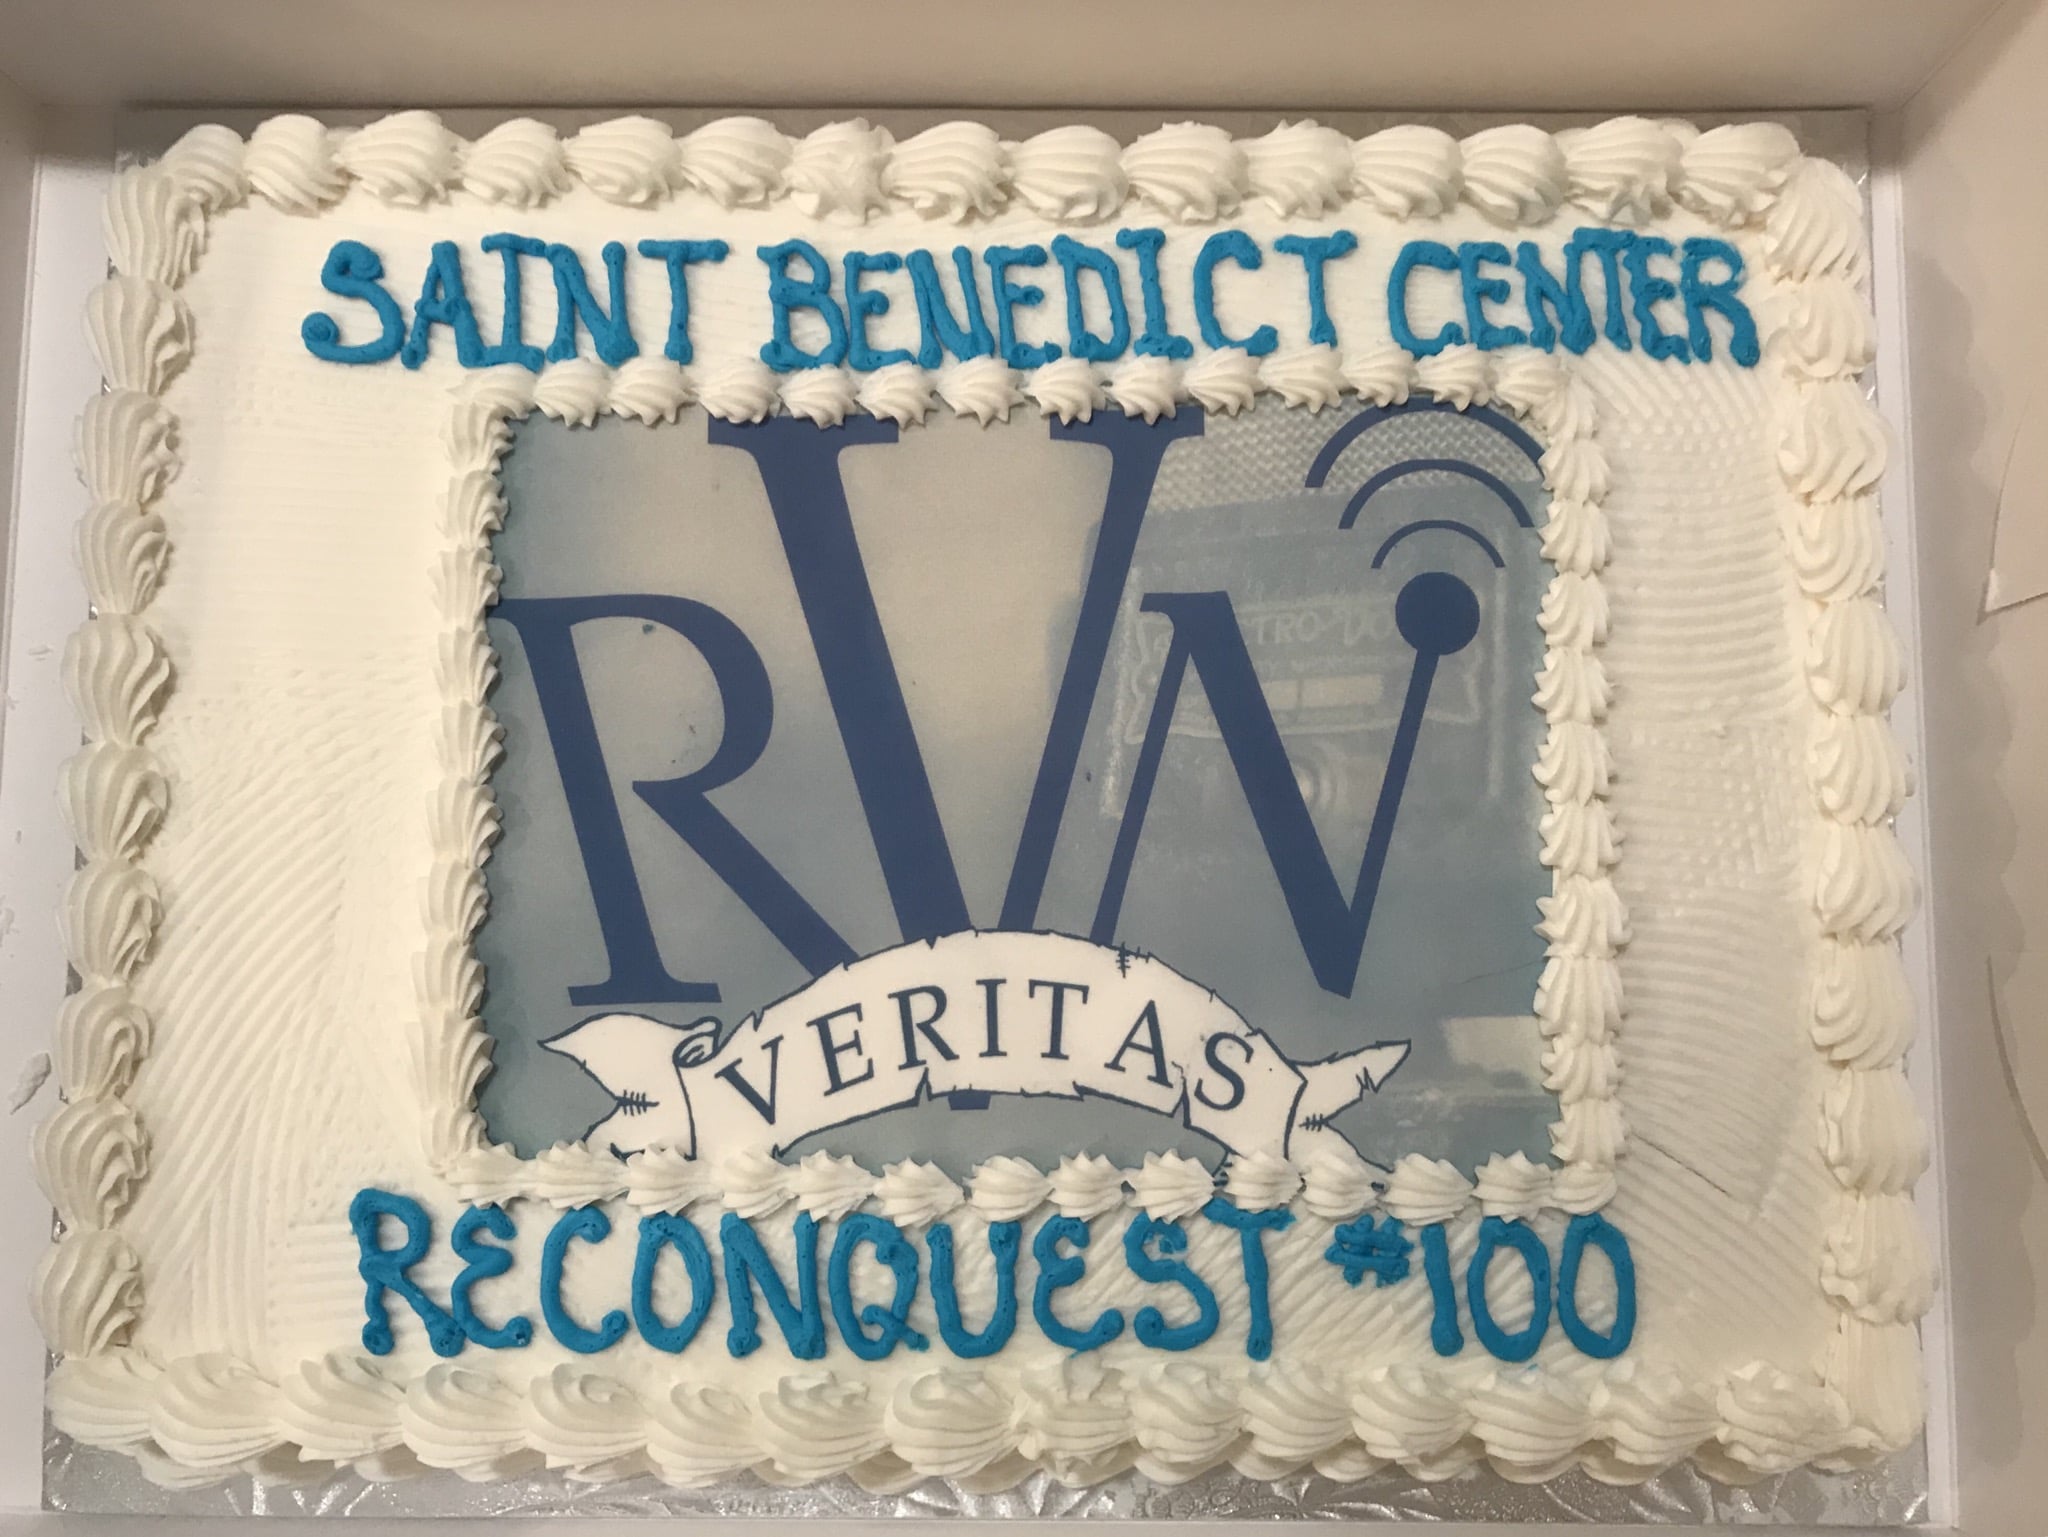 Happy 100 Episode Birthday To ReConquest Radio & Brother André Marie!